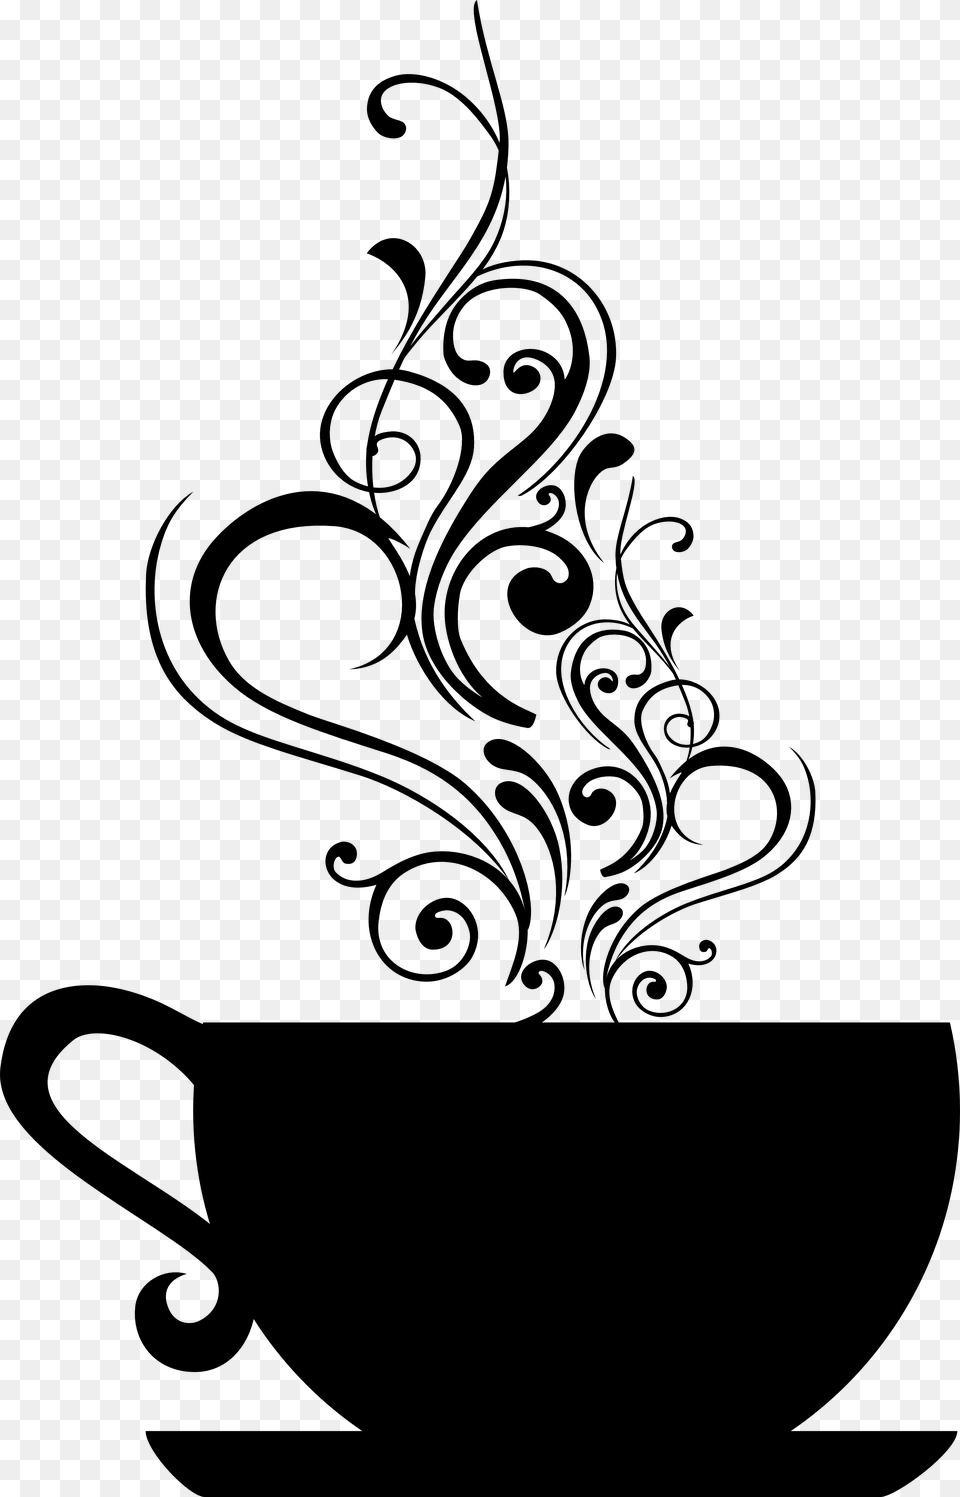 Images For Gt Vintage Tea Cups Black And White Tea Tea Cup Black And White, Stencil, Art, Beverage, Coffee Png